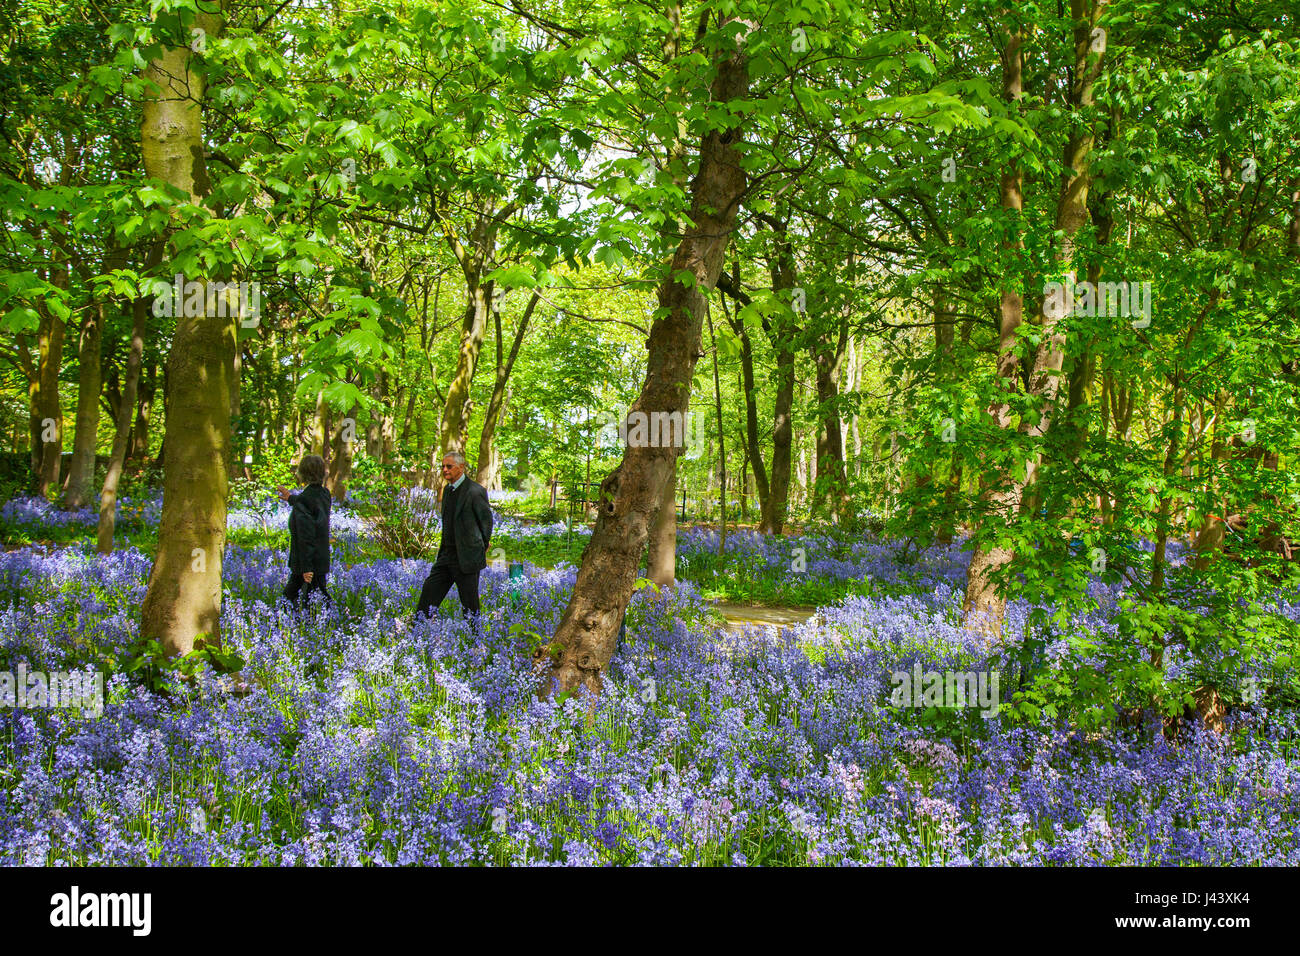 Woman exploring British flowering bluebell woodland in Warton Hall Gardens, Fylde, UK. May, 2017. Sunny spring day as visitors explore among the fantastic array of spring bluebells. Bluebell woods where this favourite flower is incorporated into formal planting. Warton Hall is a Georgian Manor House set in 4 acres of garden with a beautiful bluebell woodland walk. Once owned by Augustus Wyckham Clifton of the Clifton family of Lytham, Lancashire. Stock Photo